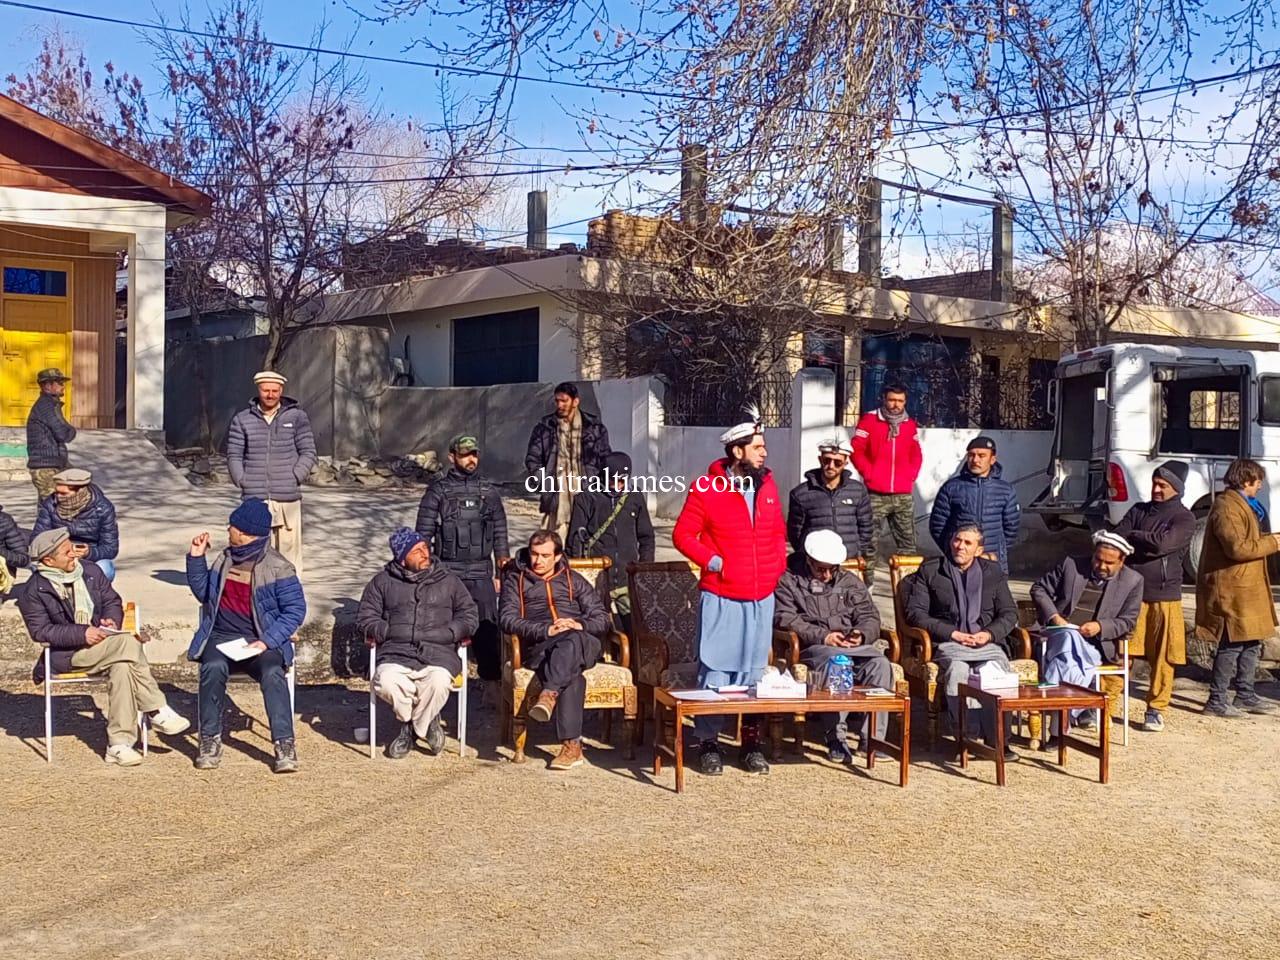 chitraltimes upper chitral bijli meeting chaired by dc upper muhammad ali 1